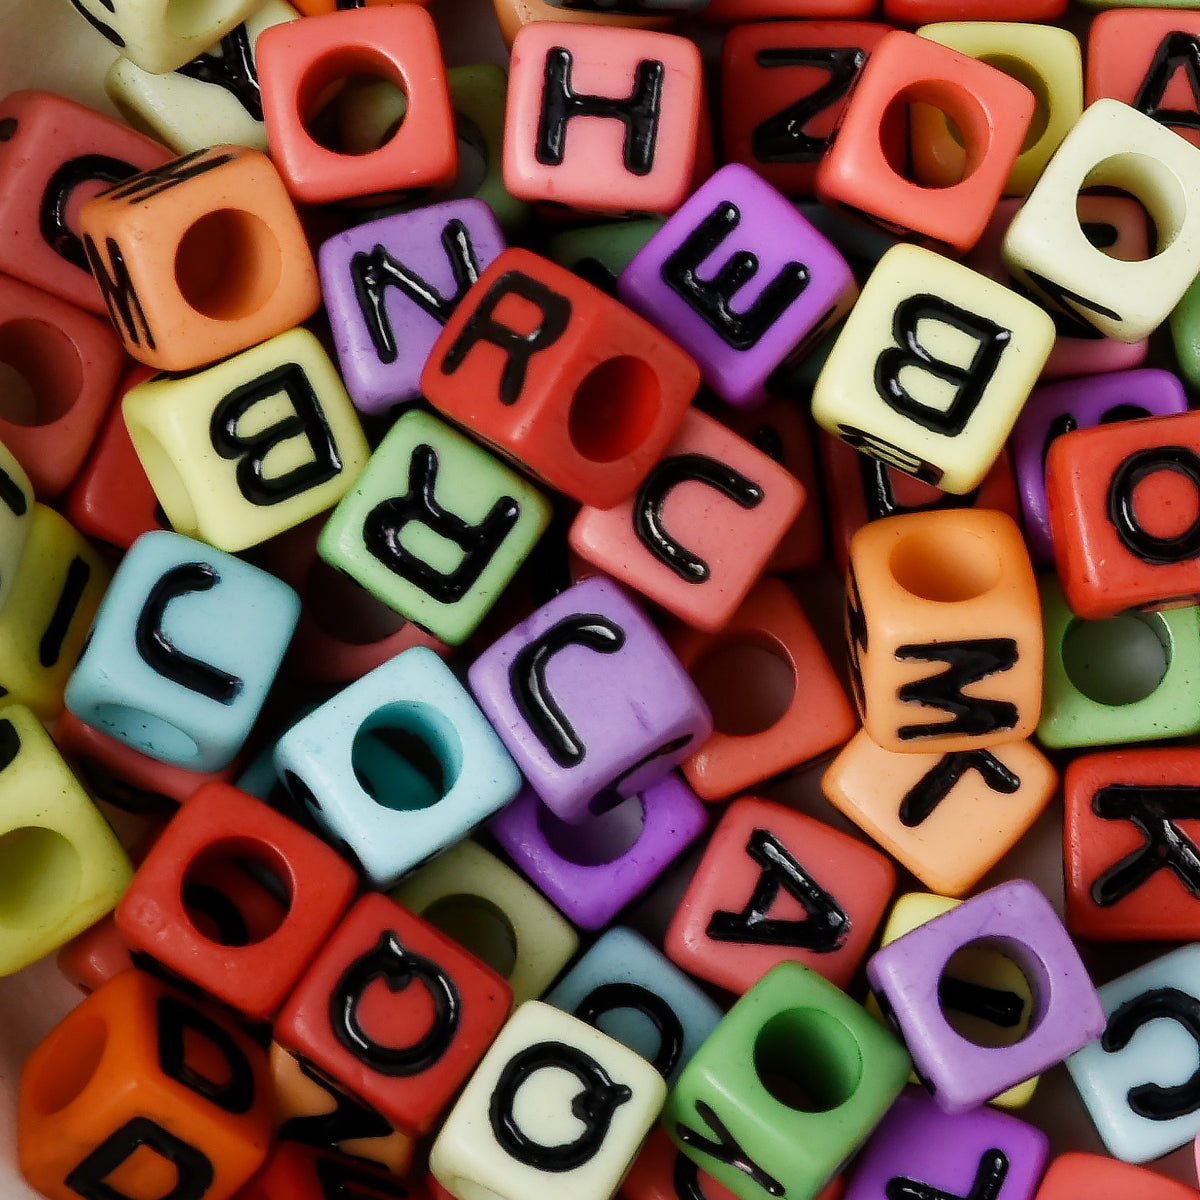 Beads　Bead　Letter　Colorful　Cube　7mm　Alphabet　Letter　Official　Multicolor　Rosebeading　Acrylic　–